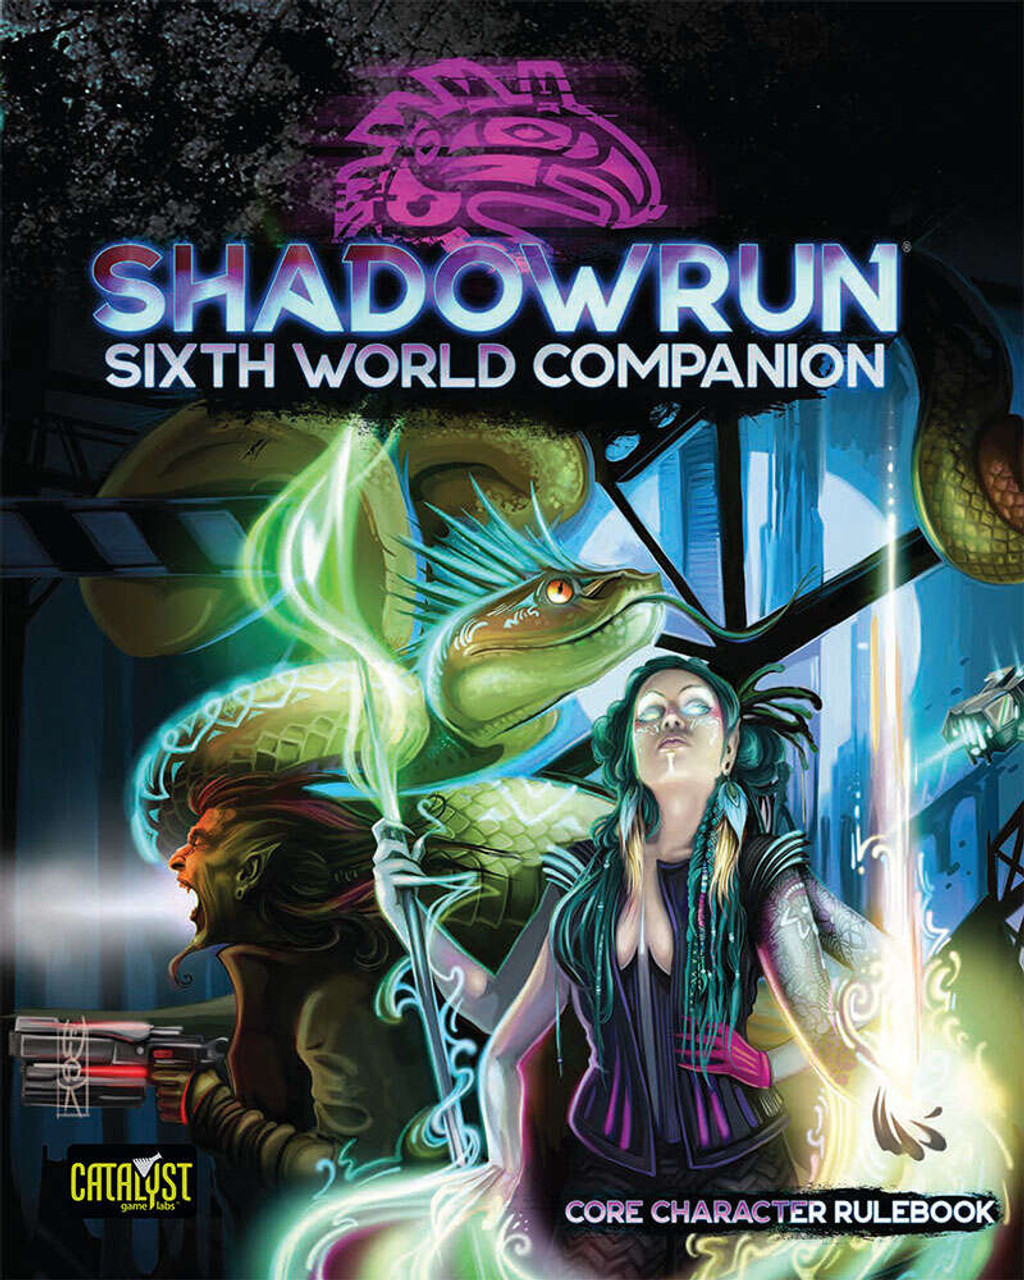 Shadowrun, Fifth Edition Core Rulebook by Catalyst Game Labs